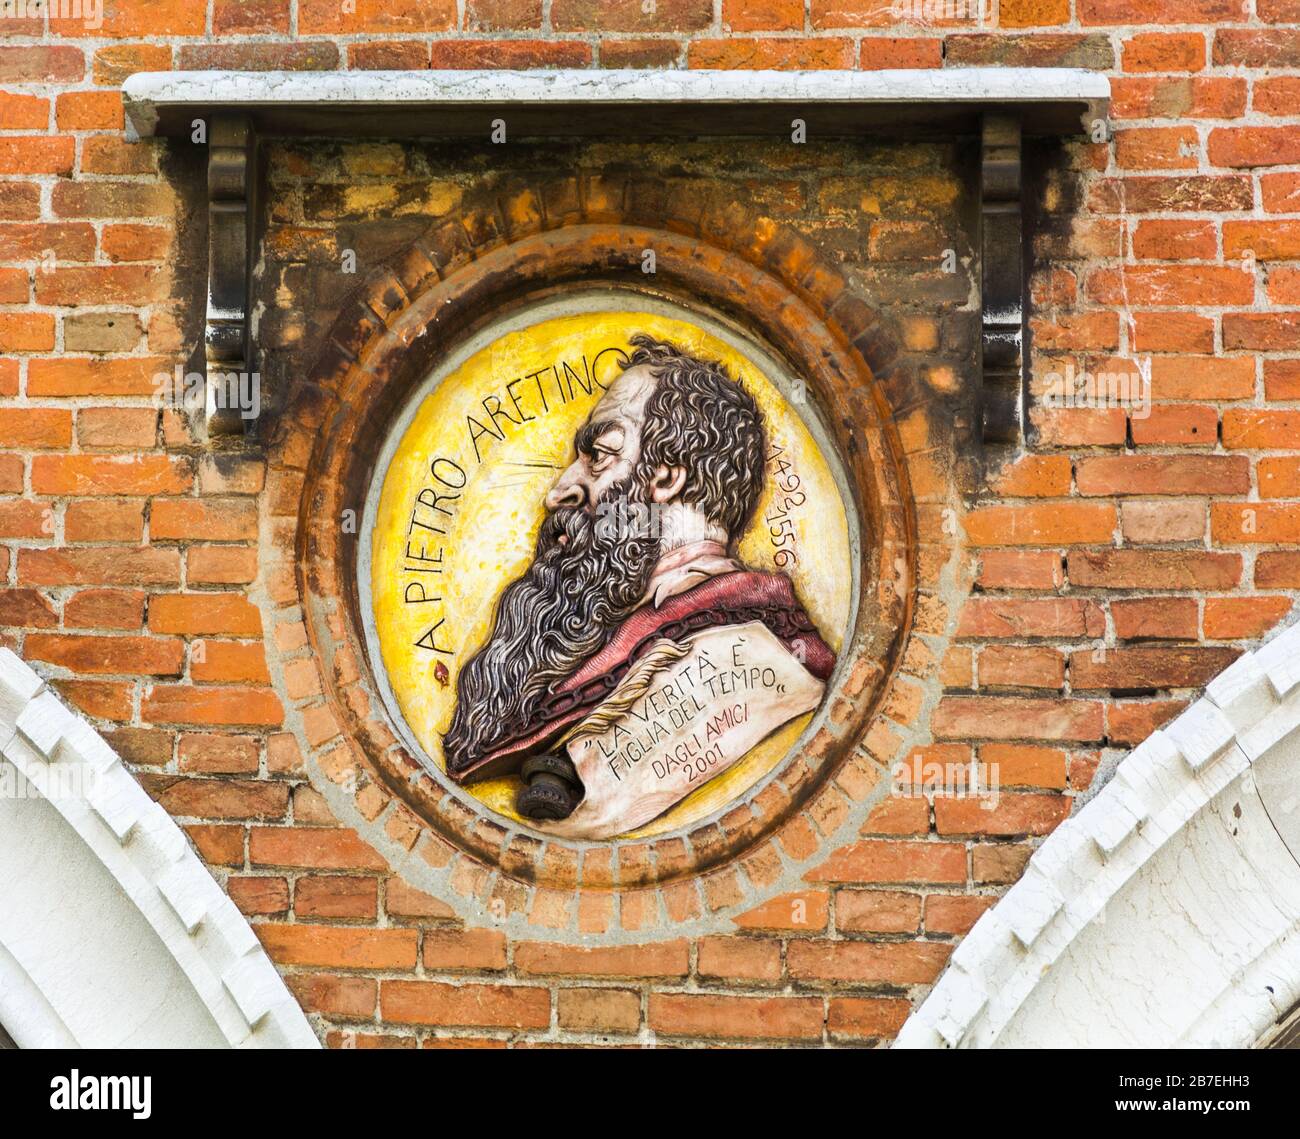 Venice, Italy - MAY 17, 2019: ceramic emblem in memory of a Pietro Aretino, late Renaissance writer, satirist, publicist and playwright, leading Itali Stock Photo